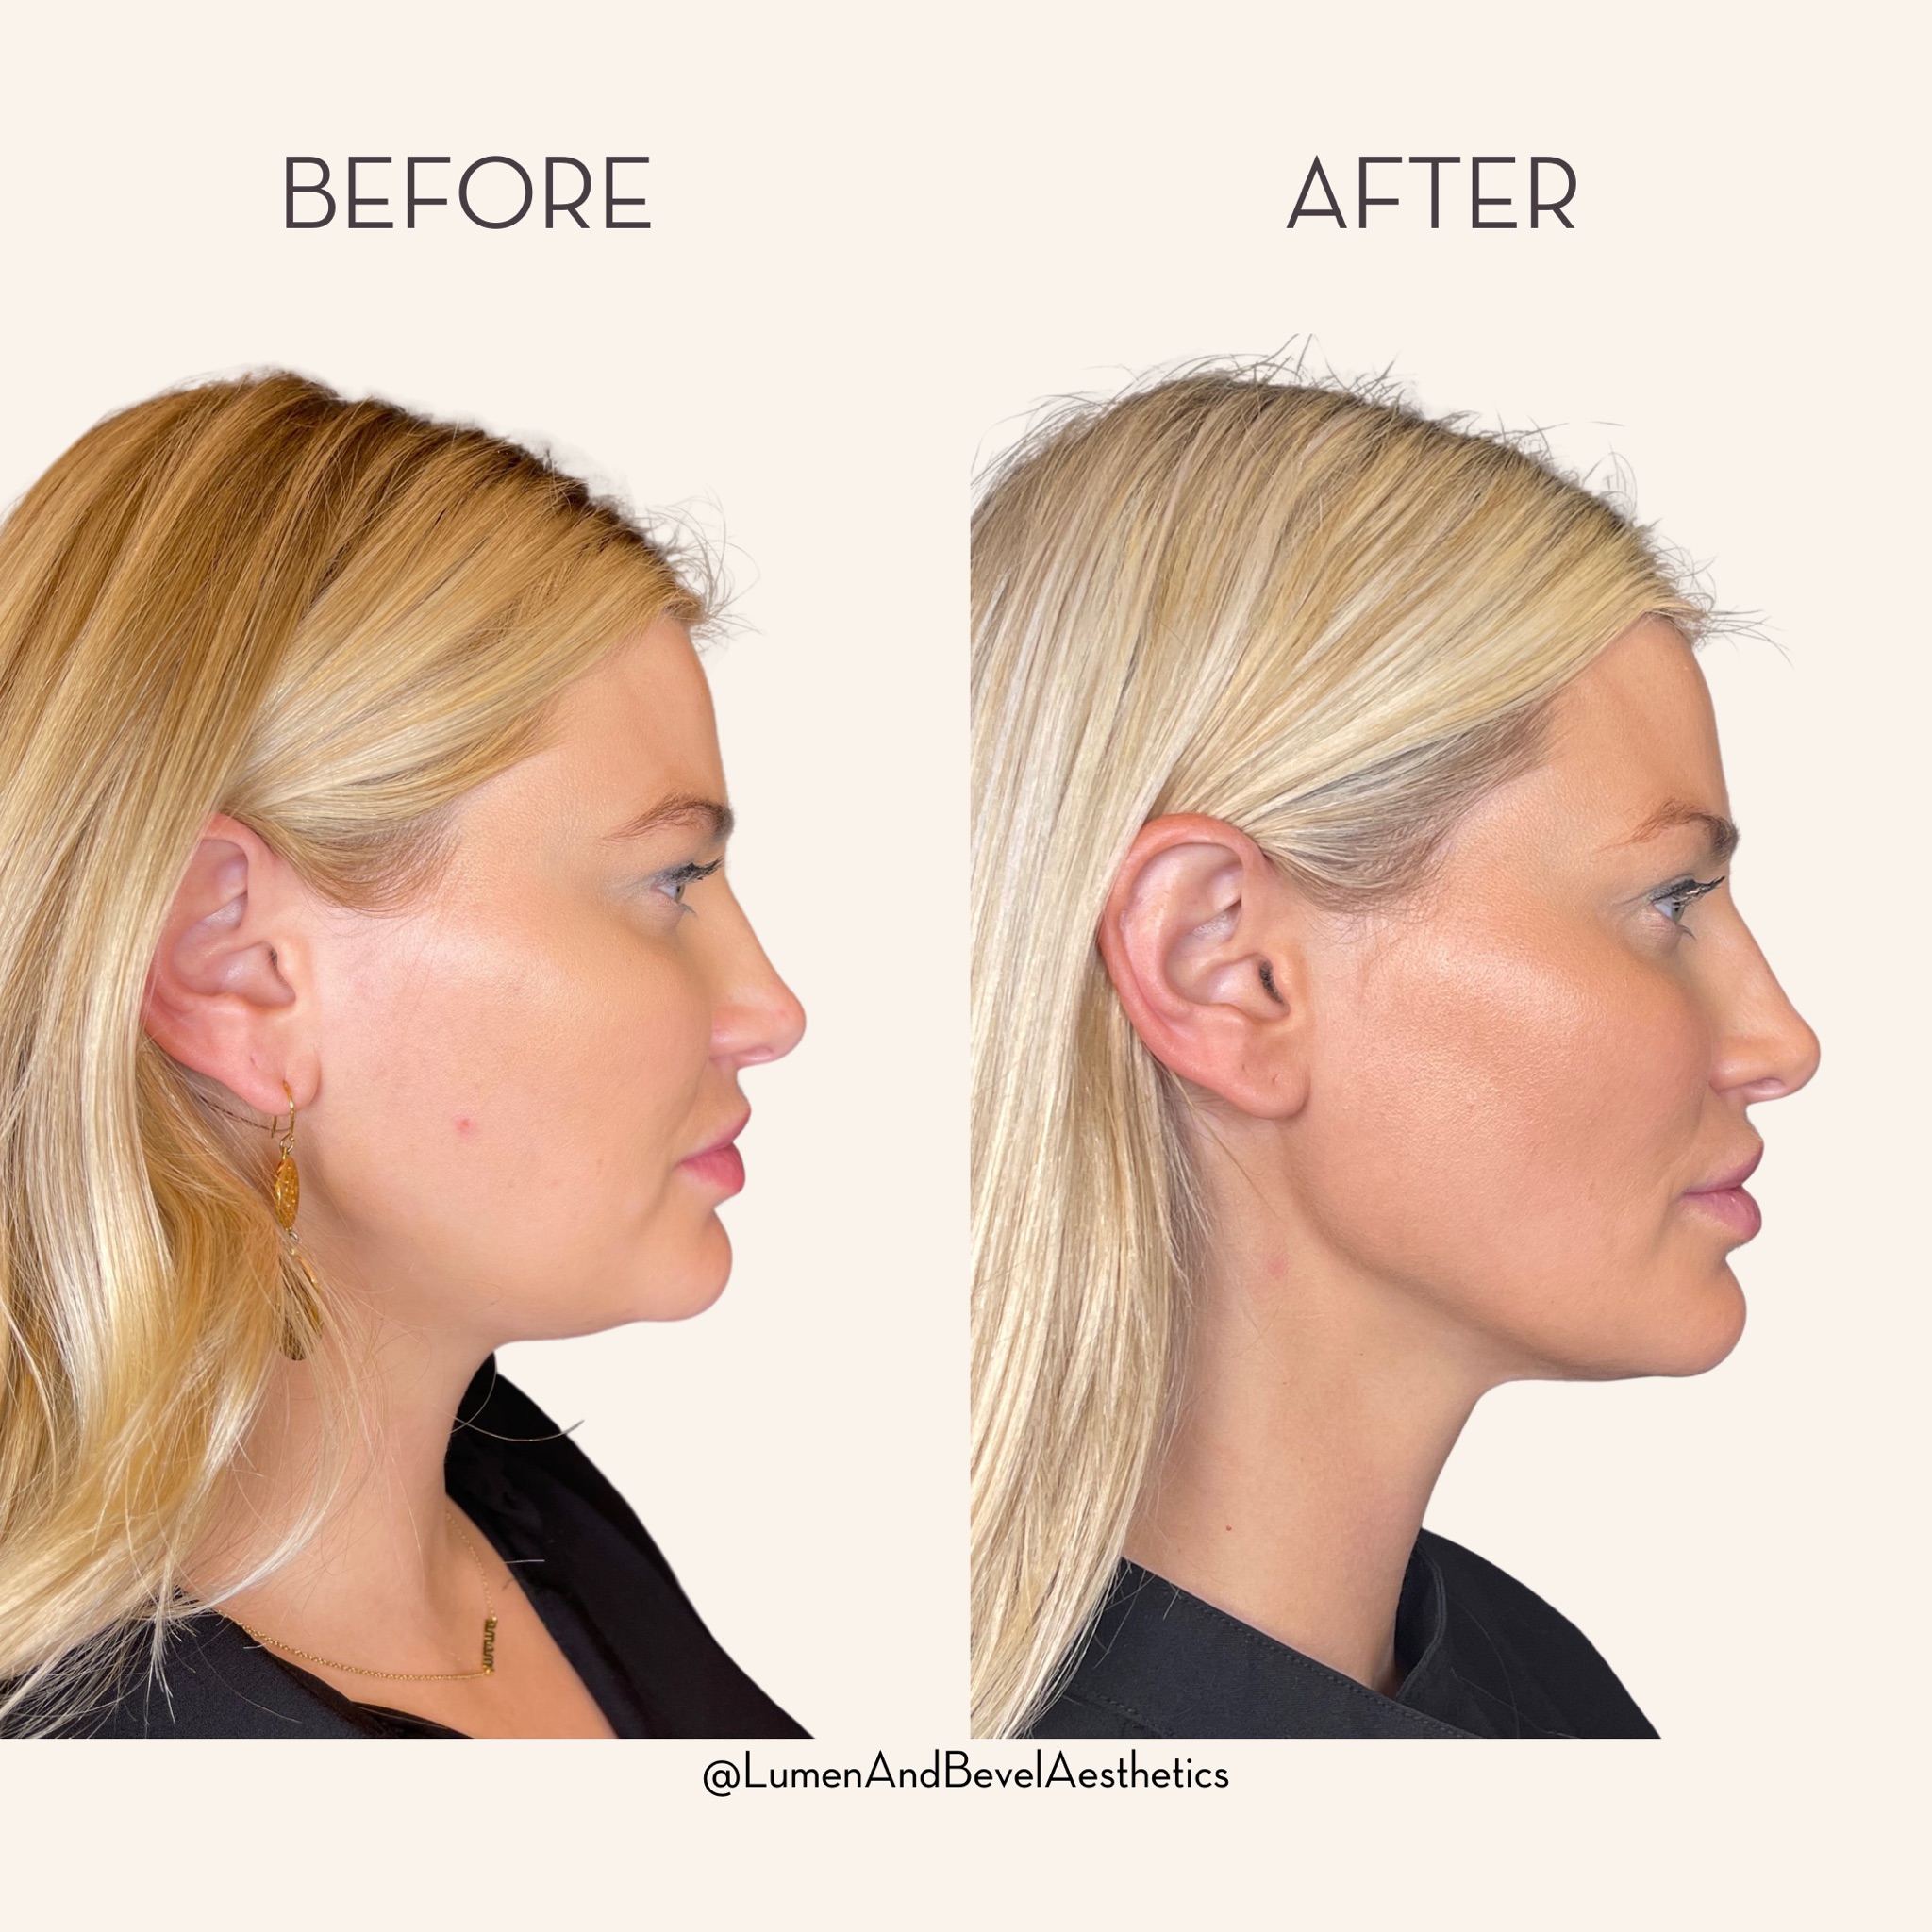 The Hourlift: Non-surgical facelift procedures can be done over